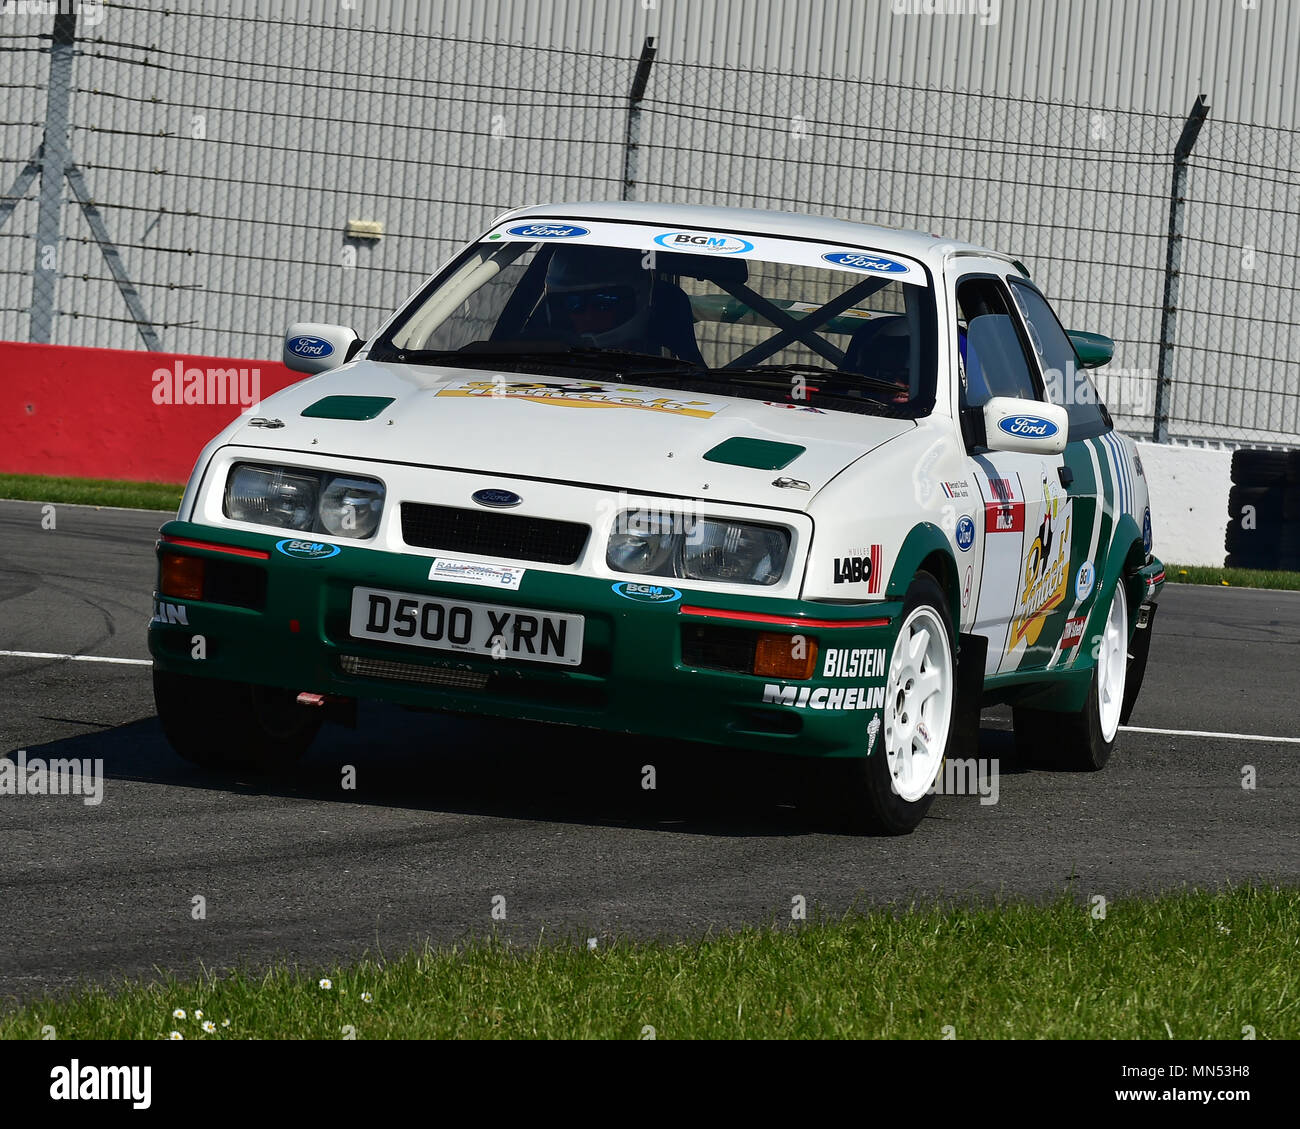 Bernard Occelli, Didier Auriol, Ford Sierra RS Cosworth, Rallying with Group B, Rally demo, Donington Historic Festival 2018, 2018, May 2018,  rally c Stock Photo